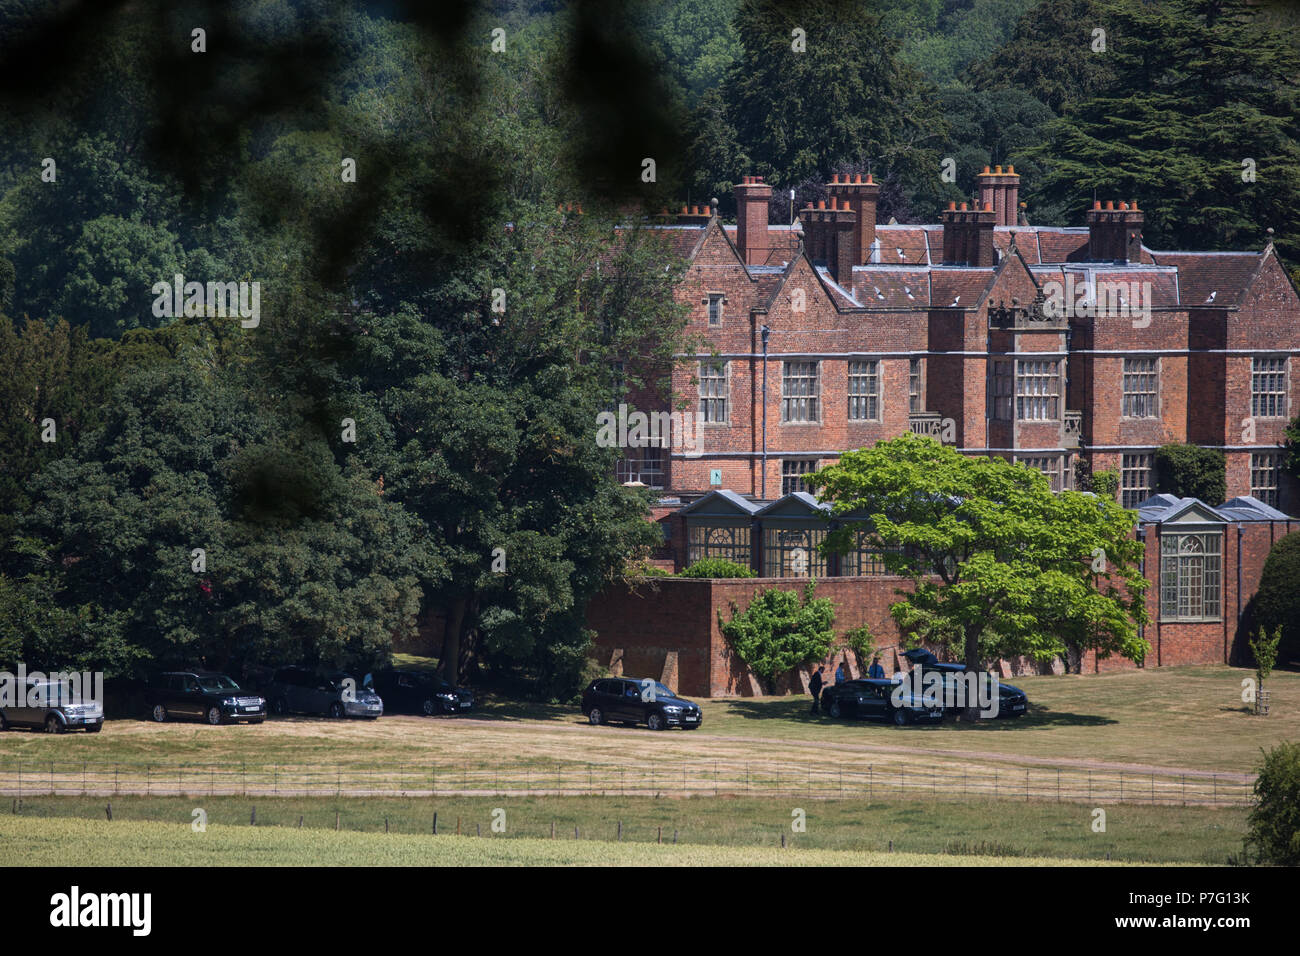 Princes Risborough, UK. 6th July, 2018. Vehicles parked outside Chequers, the Prime Minister's official country residence, where Theresa May and her Cabinet are today holding a crunch summit meeting to debate and to try to decide upon the UK's Brexit proposal for its future relationship with the European Union. The Prime Minister has put forward a new 'third way' on customs known as the 'facilitated customs arrangement' (FCA). Some reports suggest that taxis are on standby for any Ministers failing to agree a plan during the summit today. Credit: Mark Kerrison/Alamy Live News Stock Photo